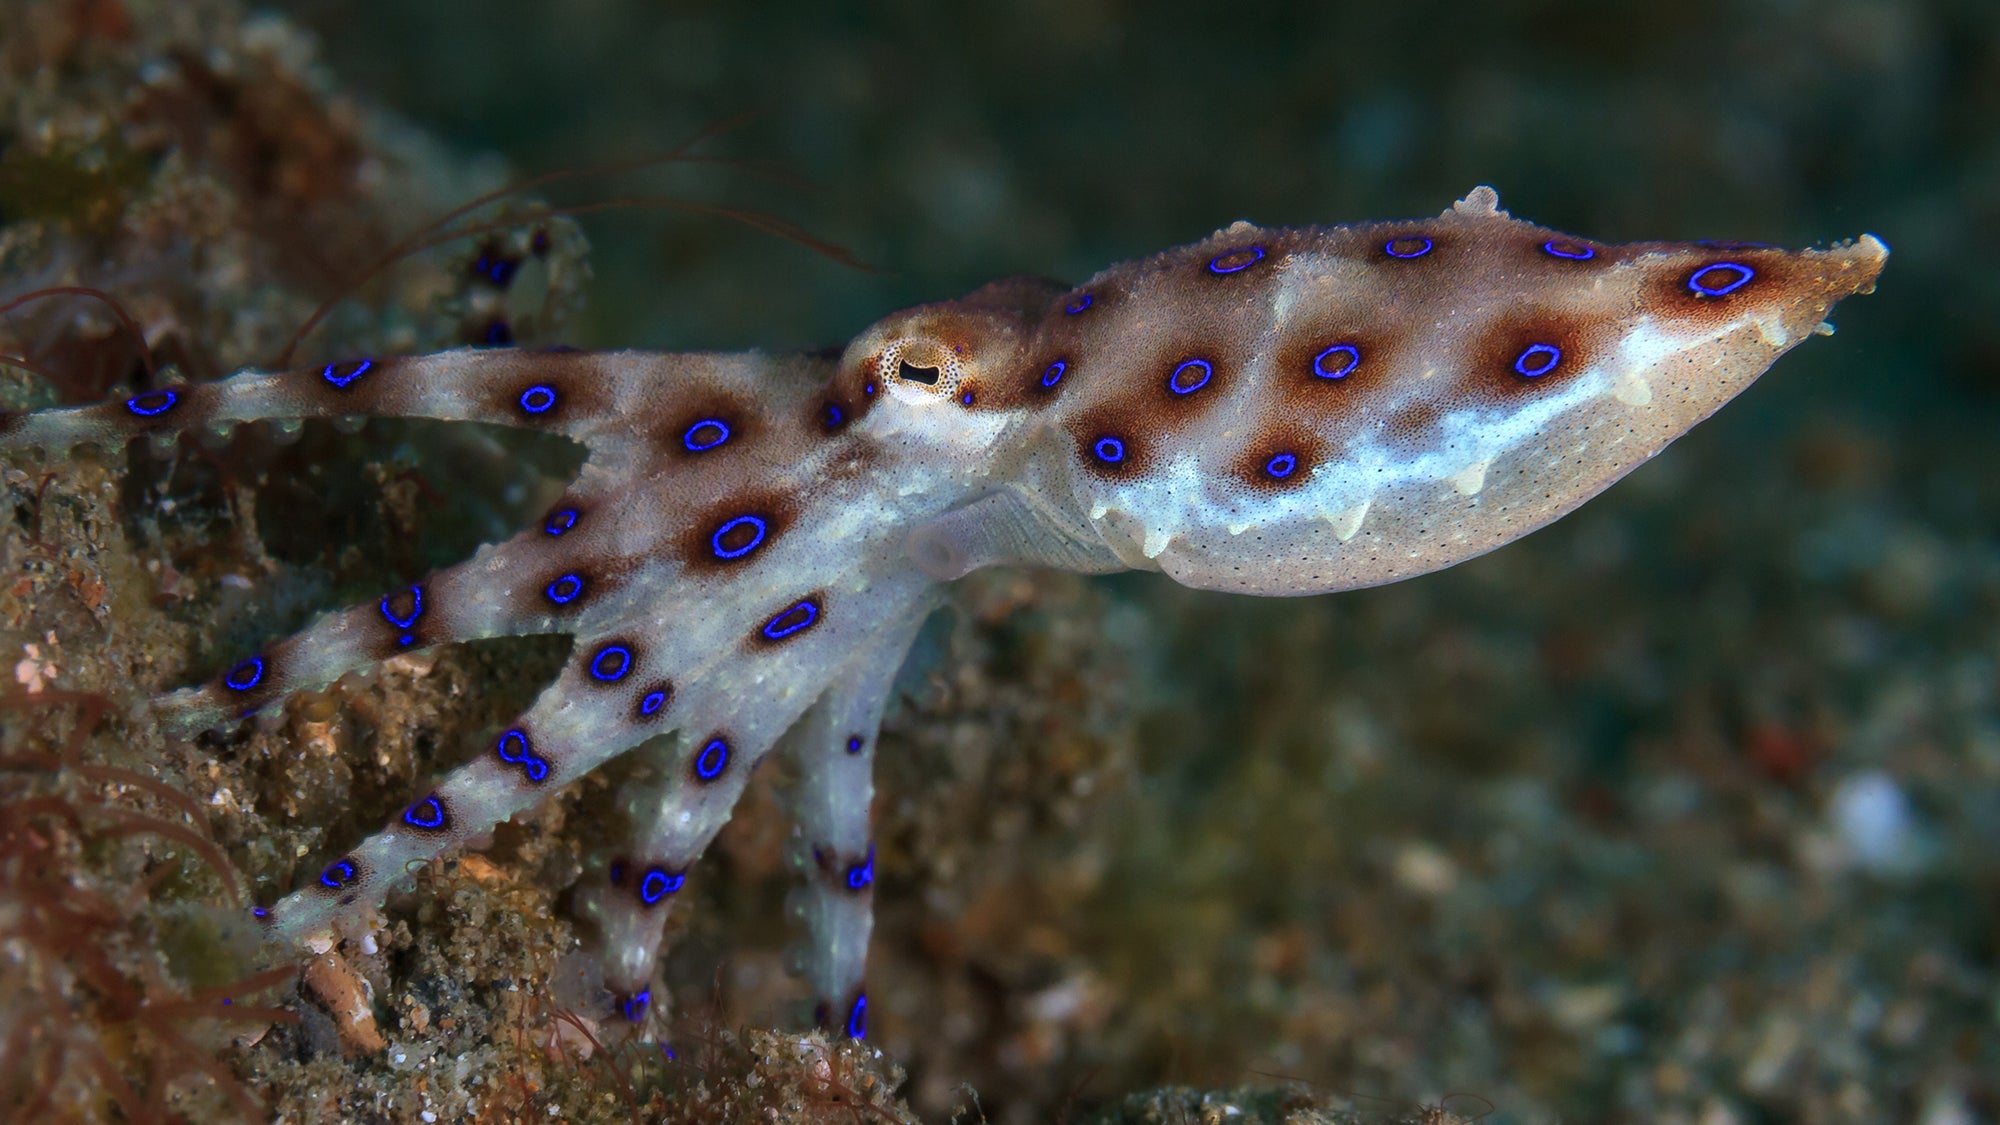 Blue-ringed octopus, one of the most toxic animals on Earth, bites woman  multiple times | Live Science